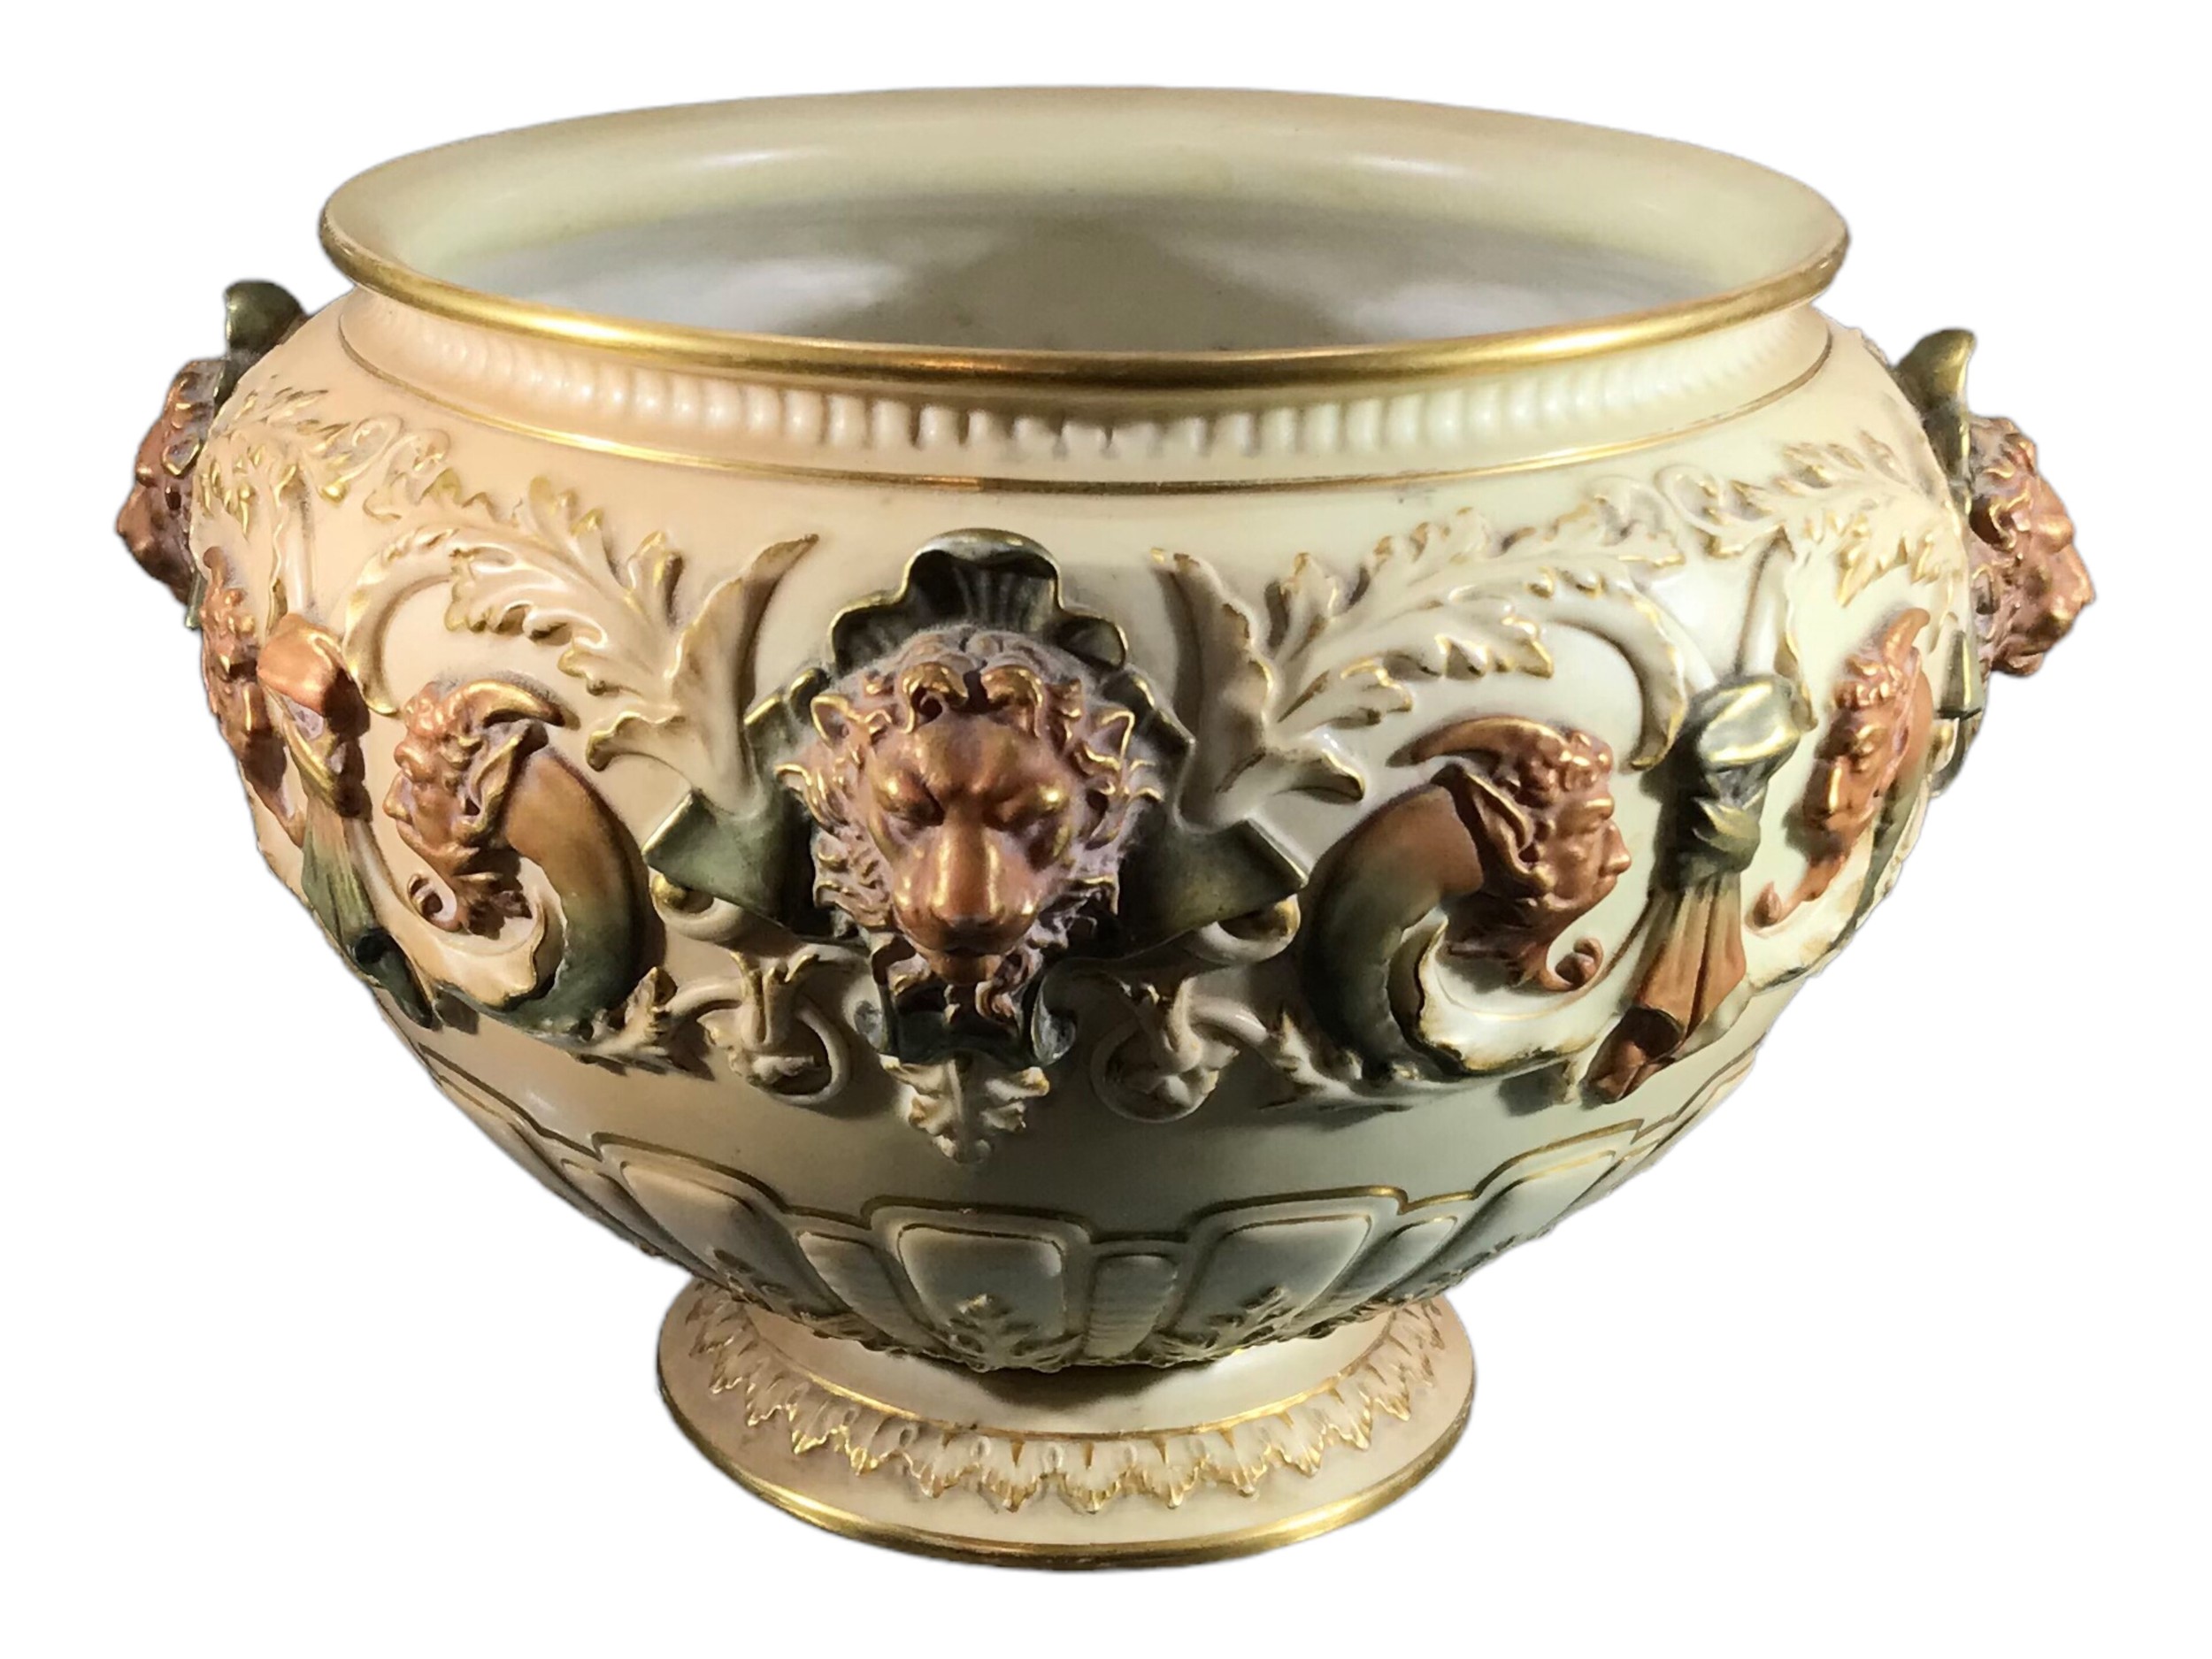 ROYAL WORCESTER, A LARGE EDWARDIAN BLUSH IVORY JARDINIÈRE Moulded in Renaissance style with four